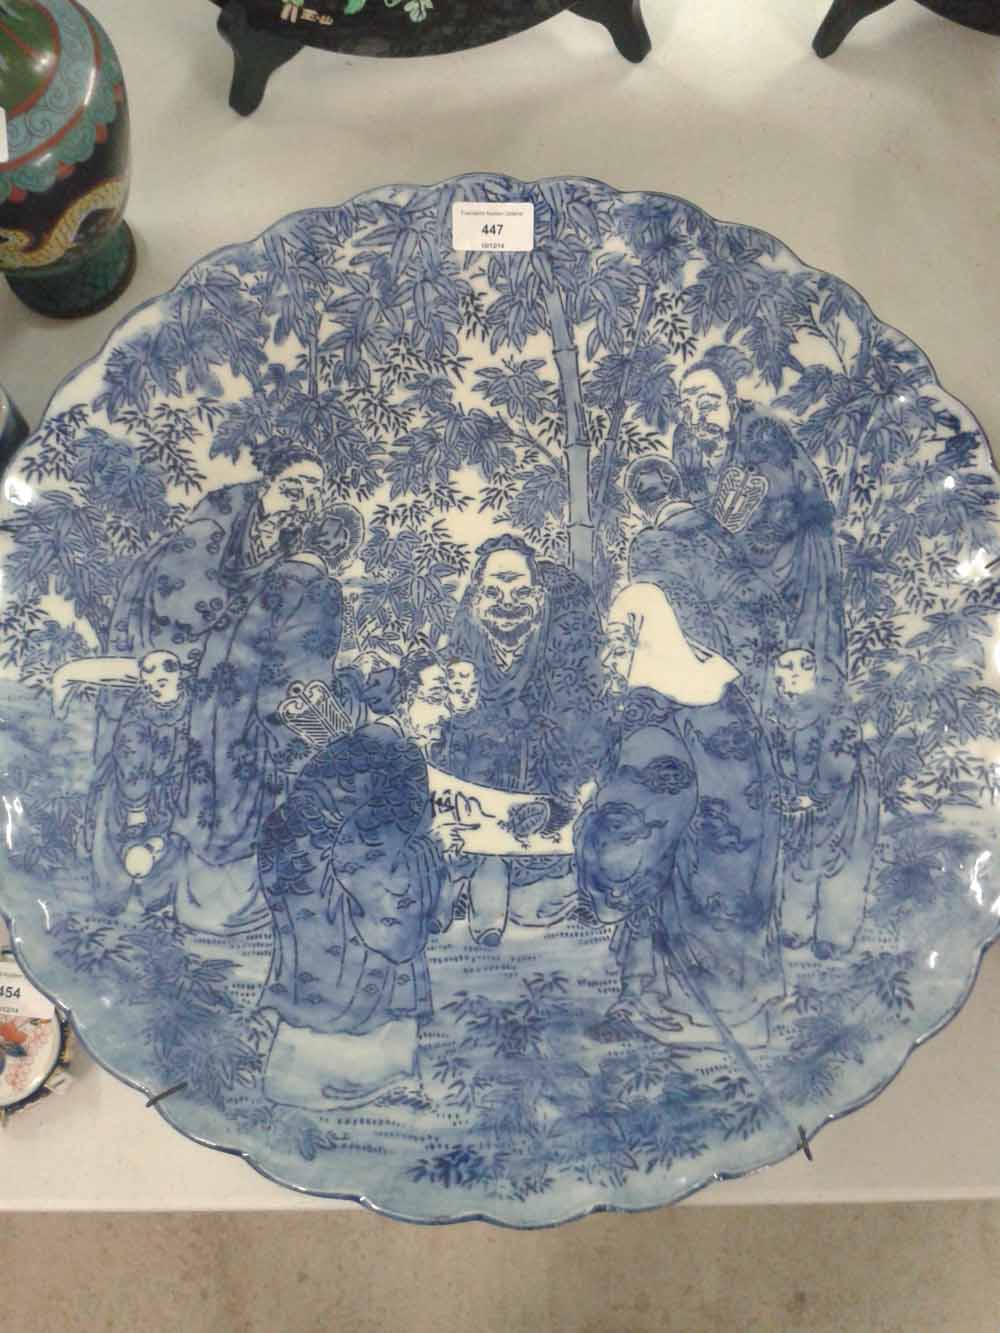 Antique Japanese oriental charger. Blue & white design, measures 18"/46cm in diameter & stands 3"/